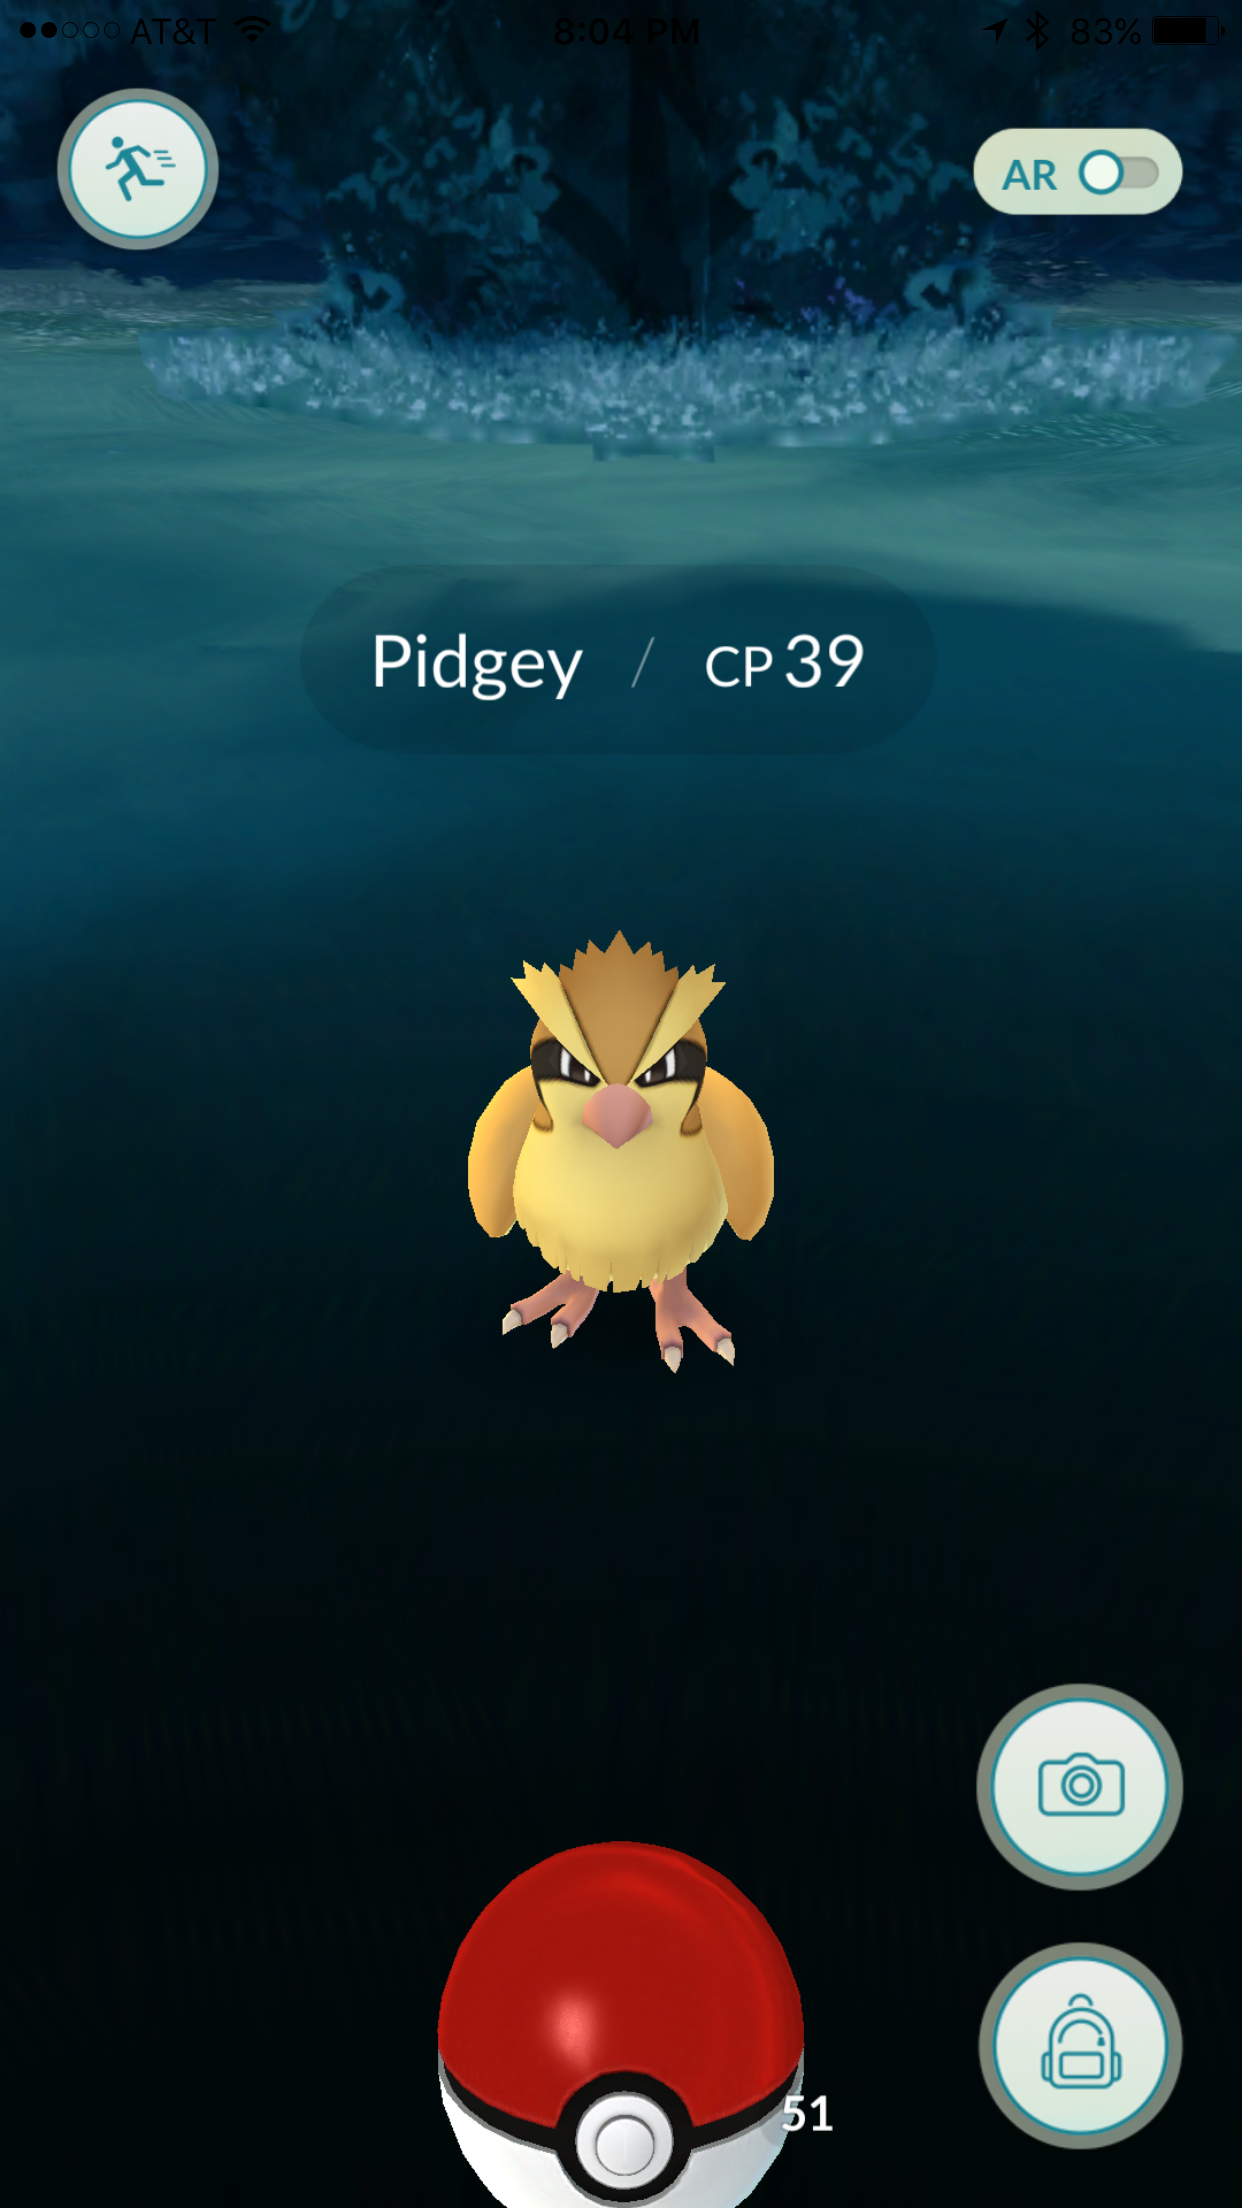 Pokemon creature about to be captured. Pidgey.